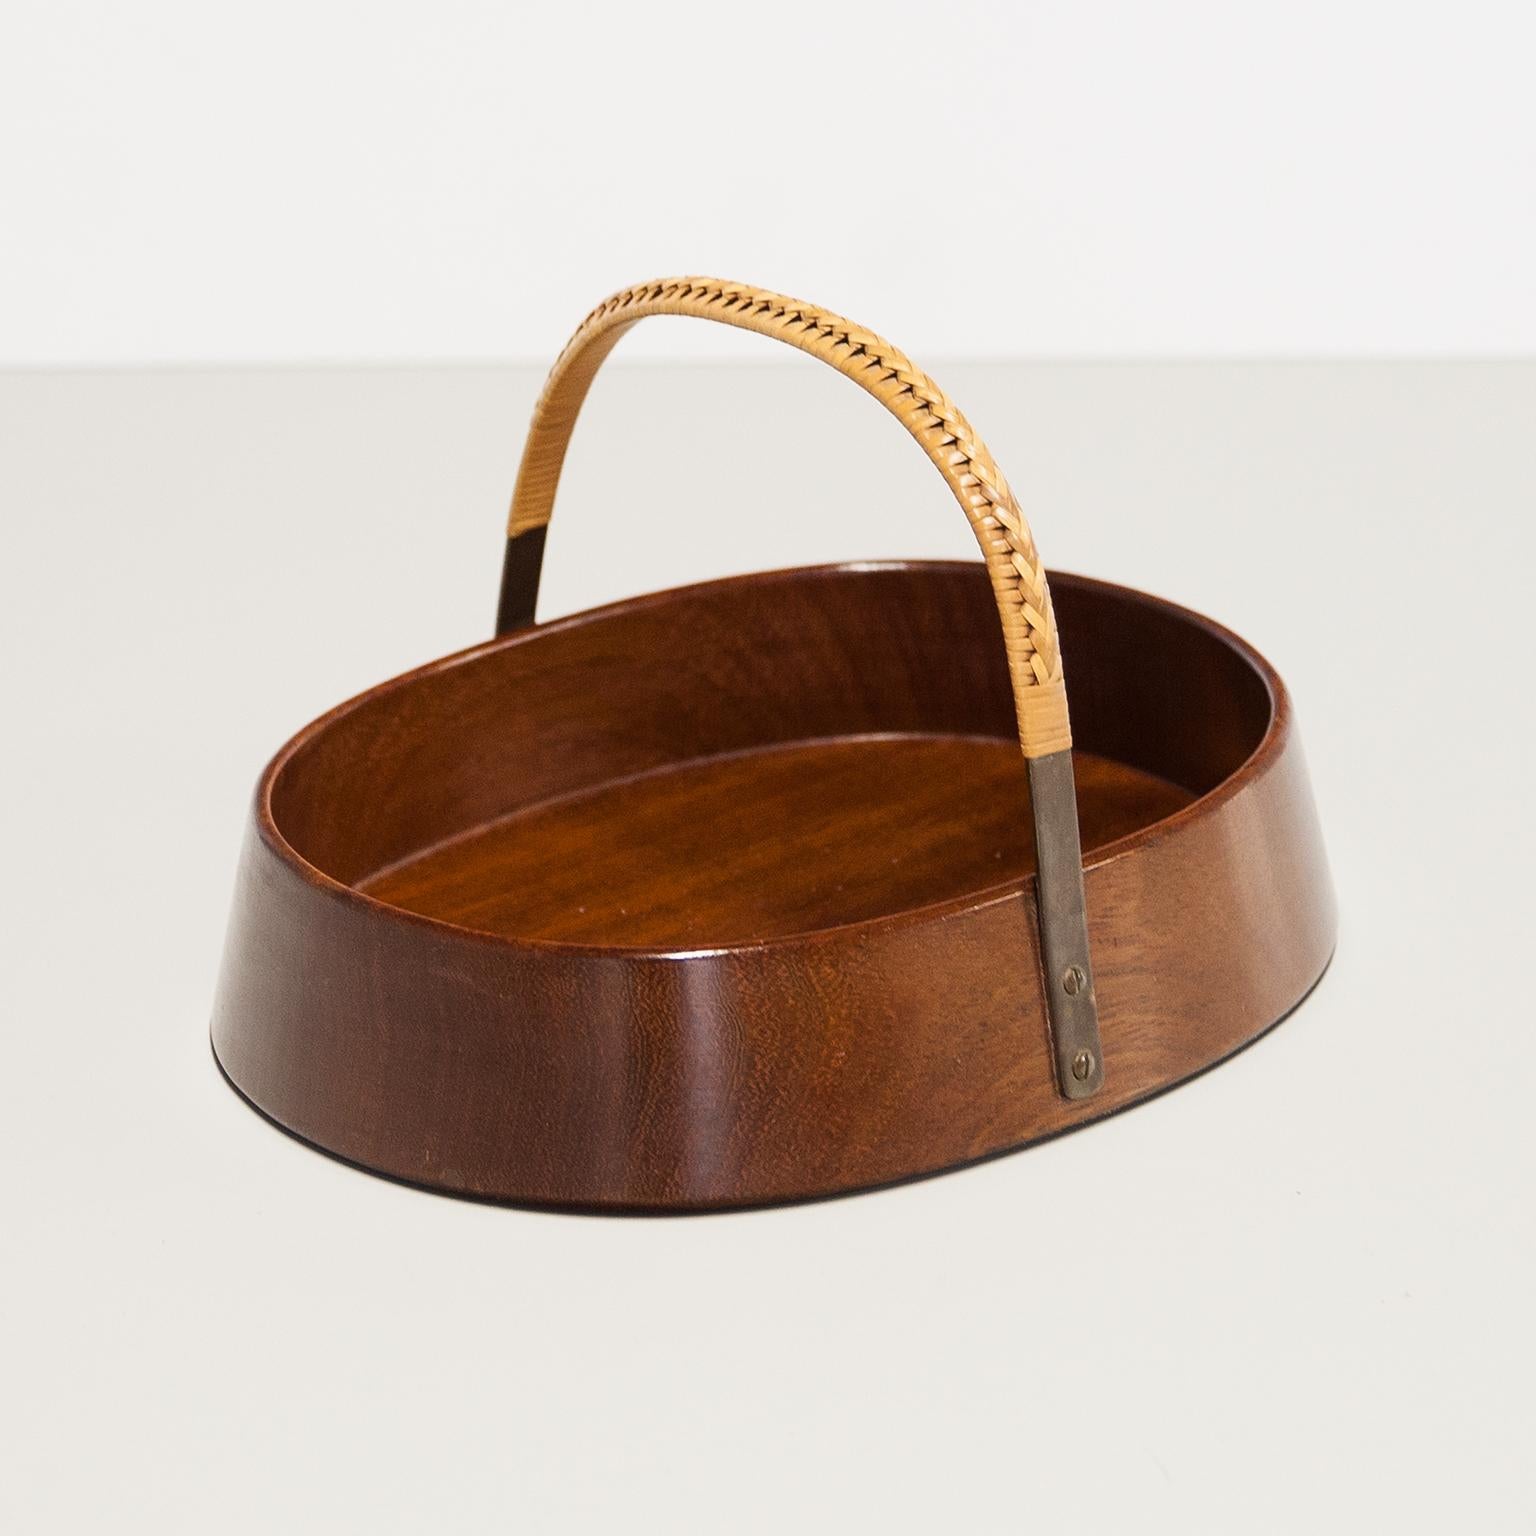 Original Carl Auböck nut bowl element made by of solid teak wood and brass loop with leather at the top for carrying. This fantastic piece was designed by Carl Auböck in the 1950s, and handcrafted in his Workshop in Vienna, Austria. The item still